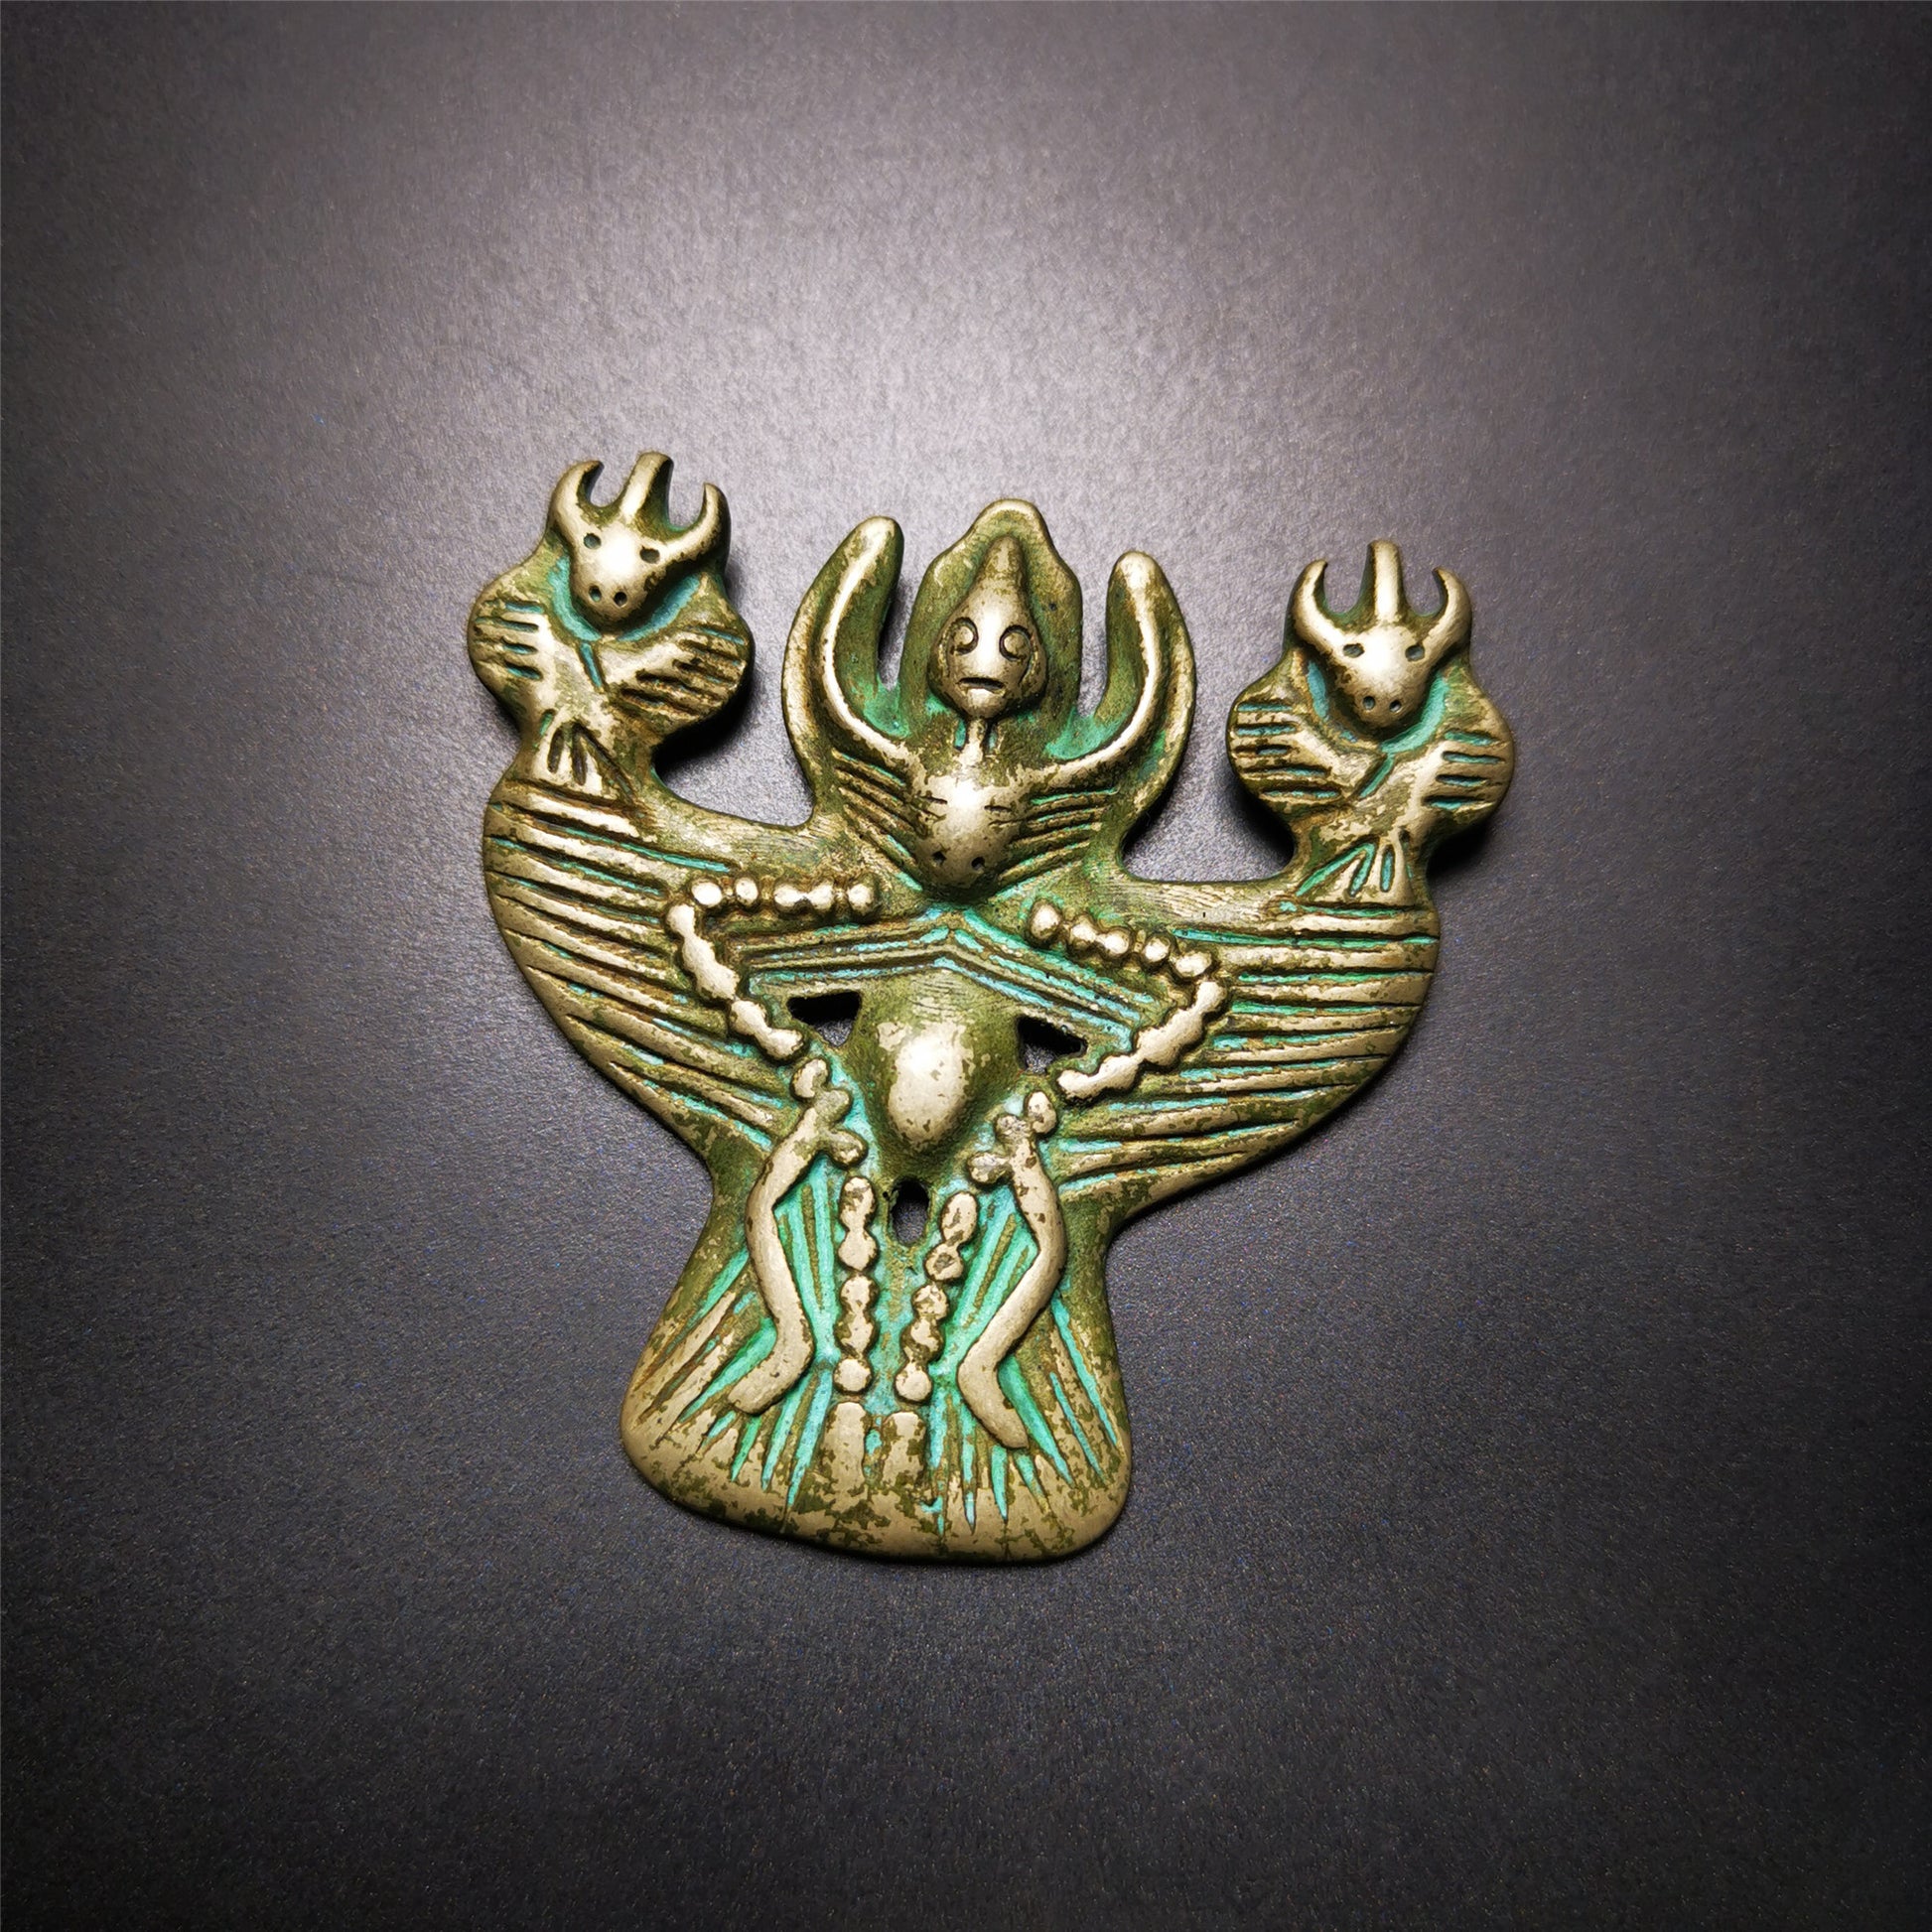 This Garuda is collected from Yaqing Monastery Baiyu County Tibet,it's a handmade badge,amulet pandent, made of copper,about 80 years old.  You can wear it as amulet pendant, or make it into wall decoration, hang on the door as a protector,or just put it on your desk,as an ornament.